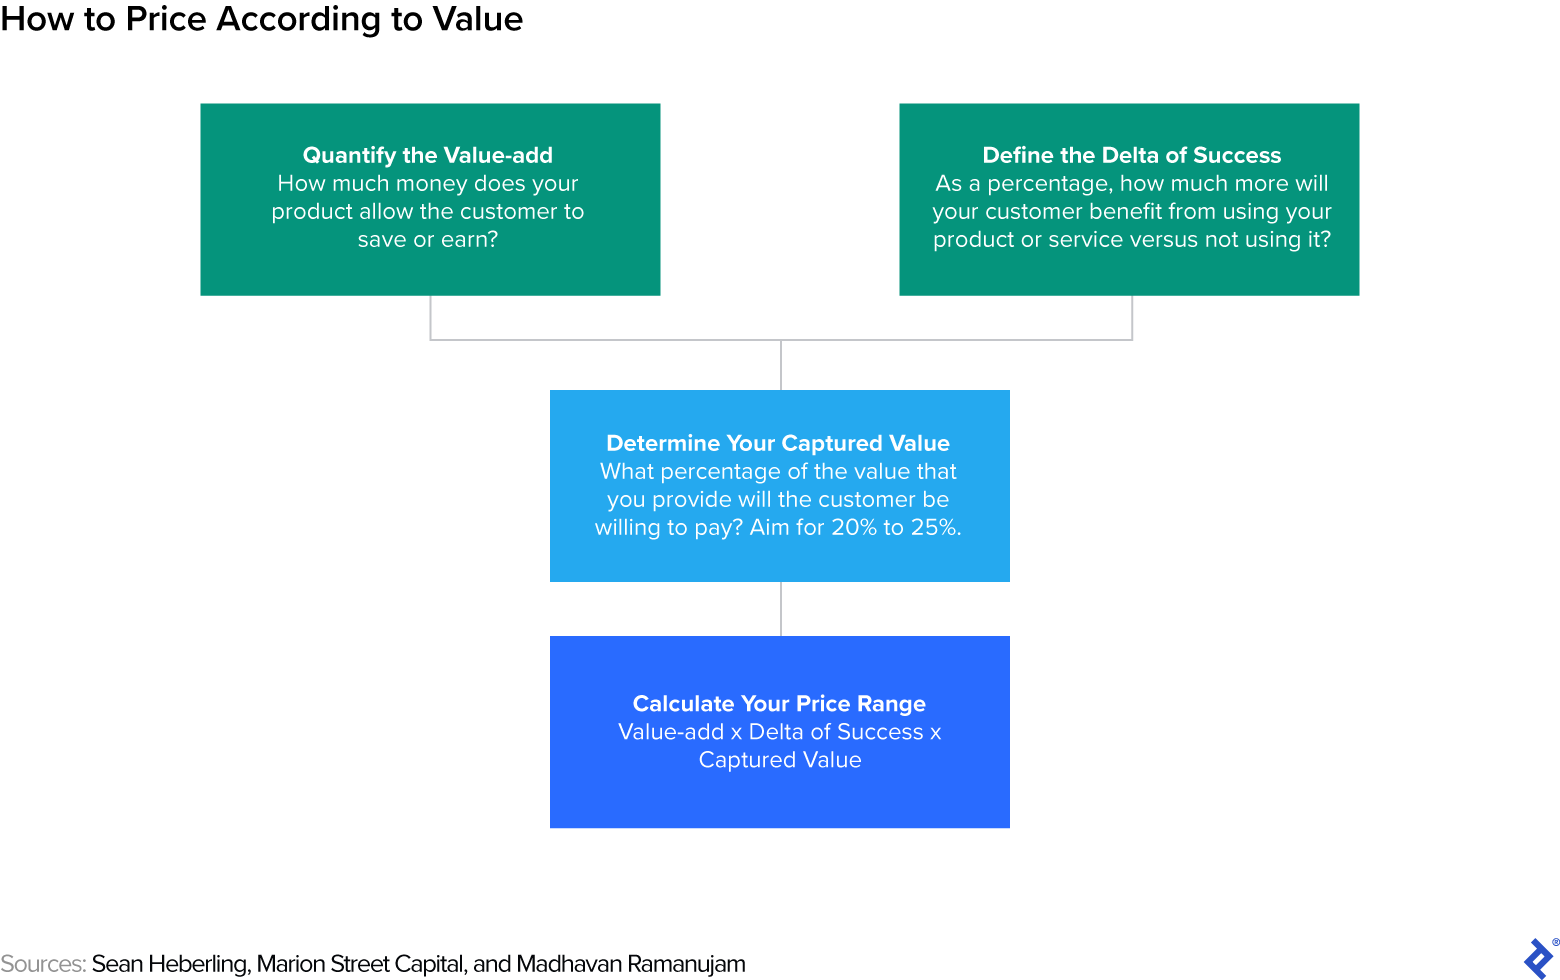 A quantitative forecasting flowchart illustrating the author’s pricing framework described immediately before this image. The headline is: How to Price According to Value.